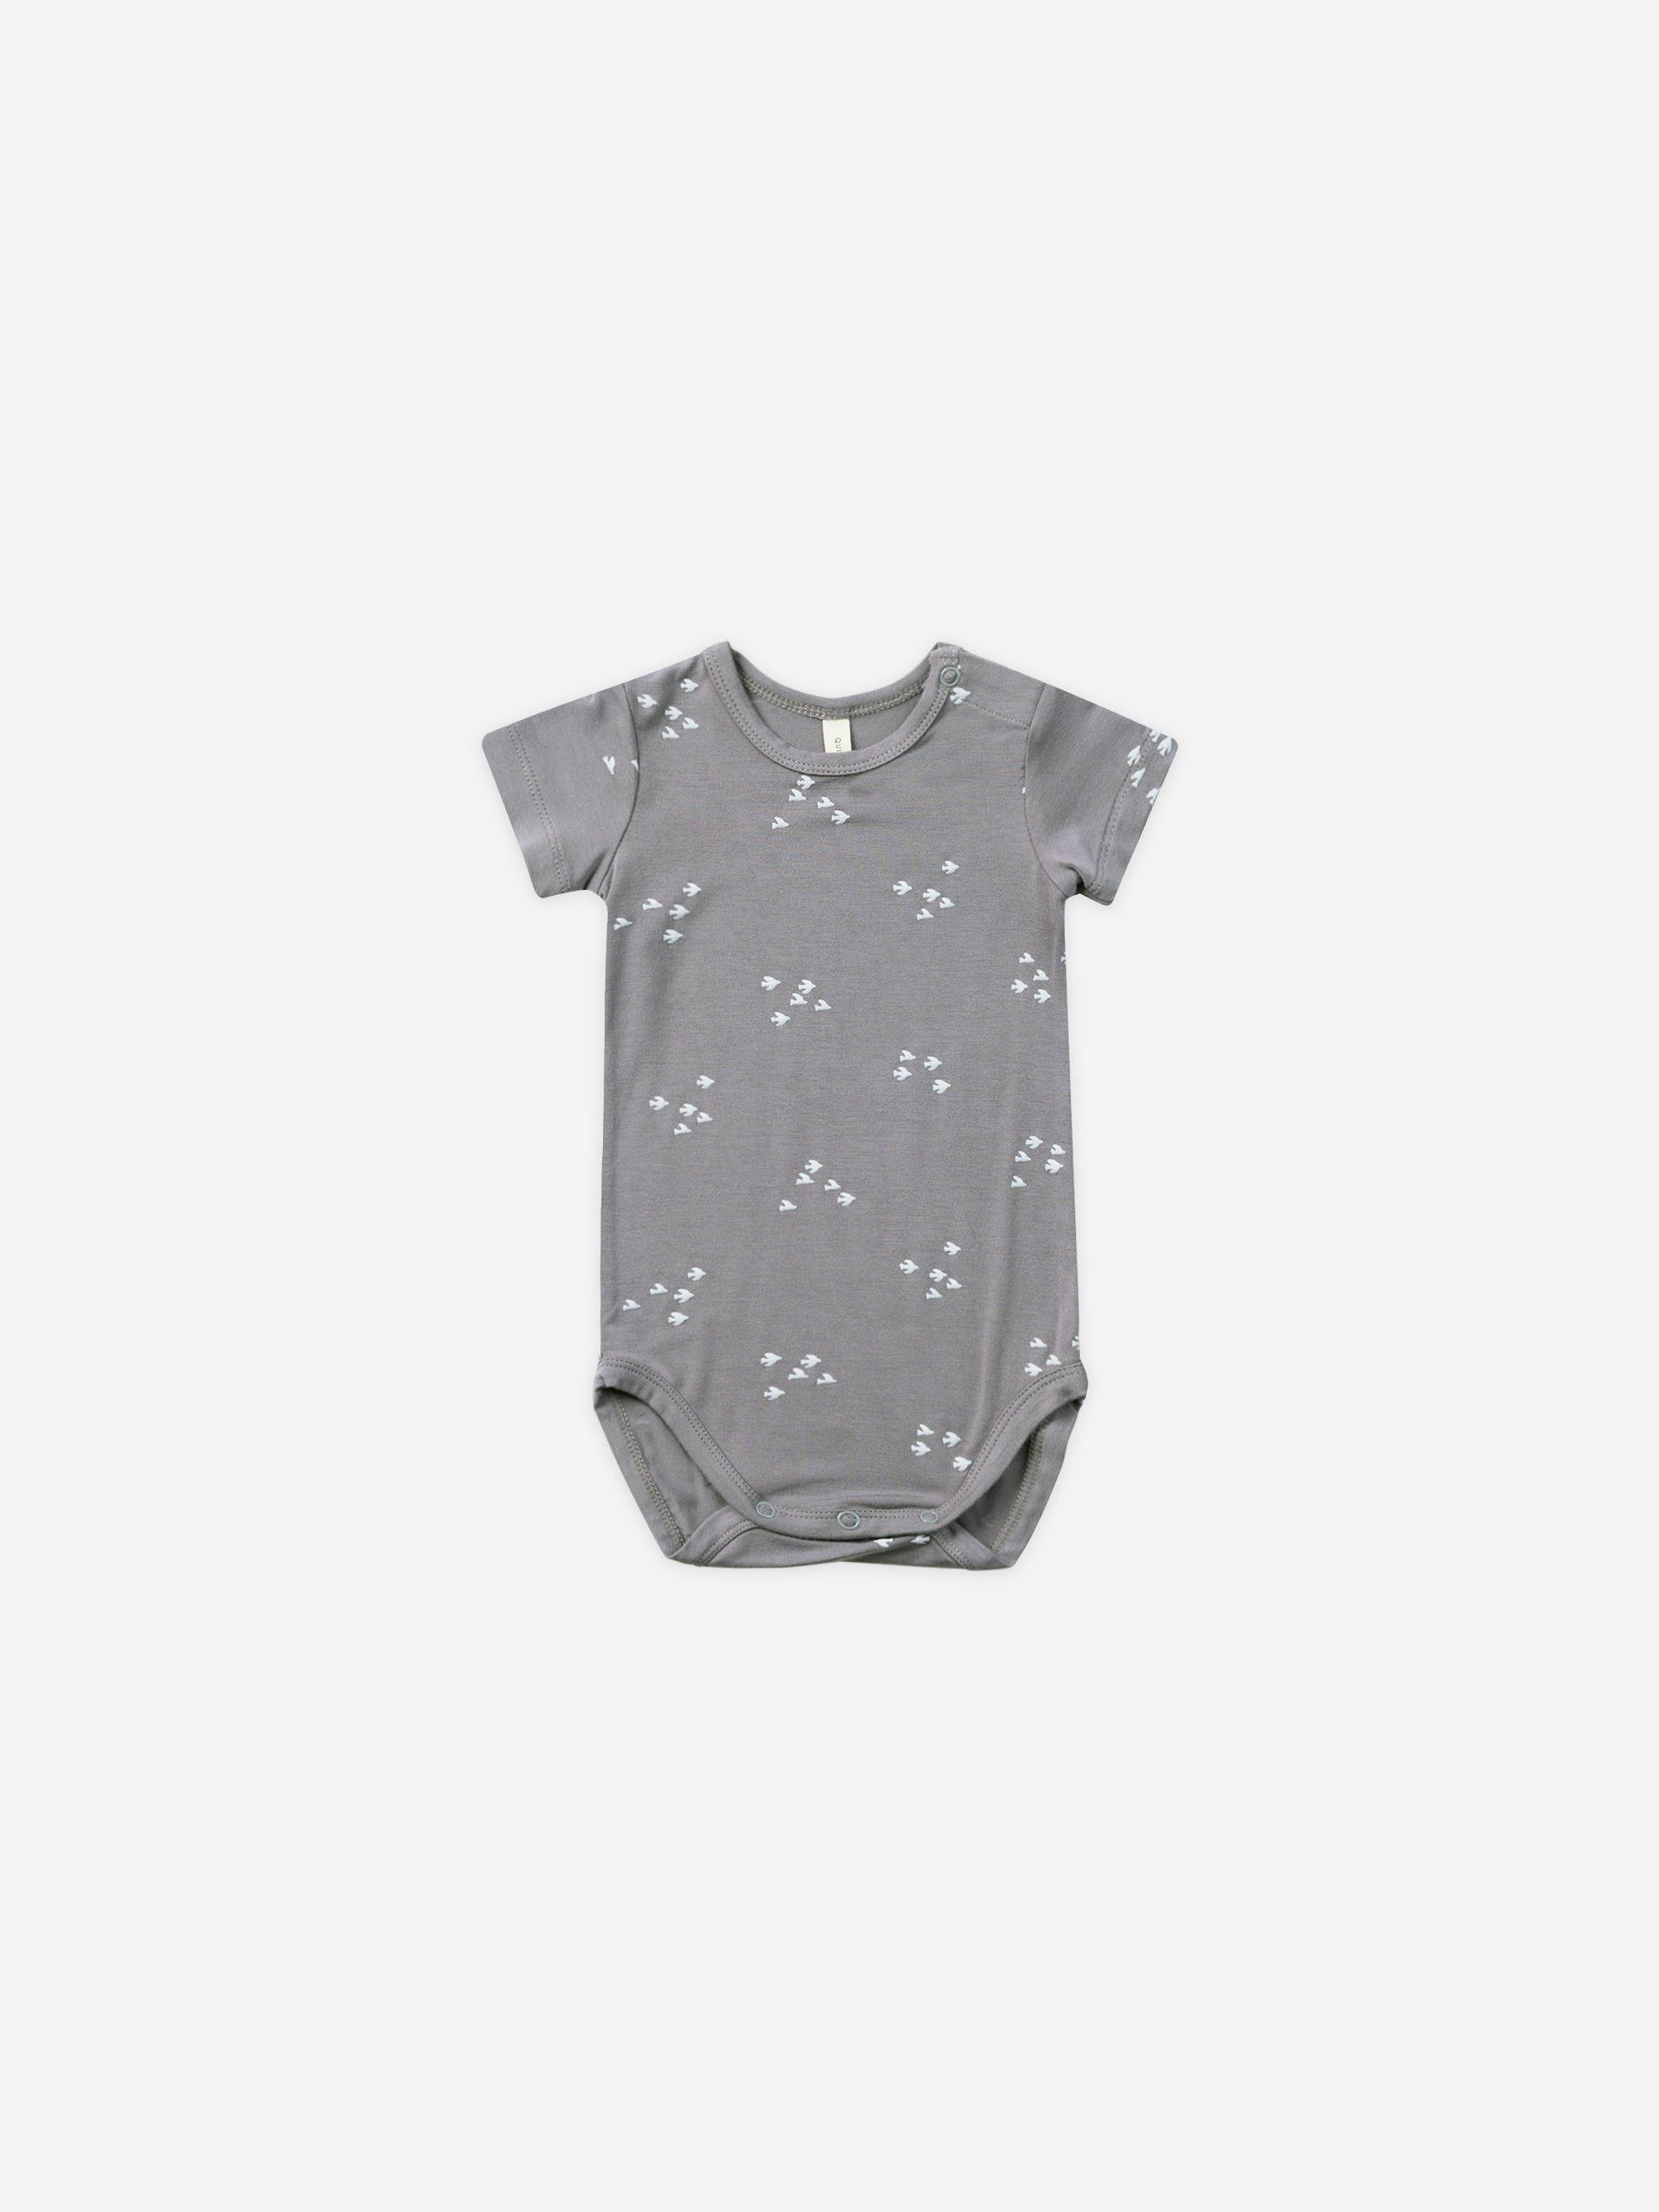 Bamboo Short Sleeve Bodysuit || Flock - Rylee + Cru | Kids Clothes | Trendy Baby Clothes | Modern Infant Outfits |